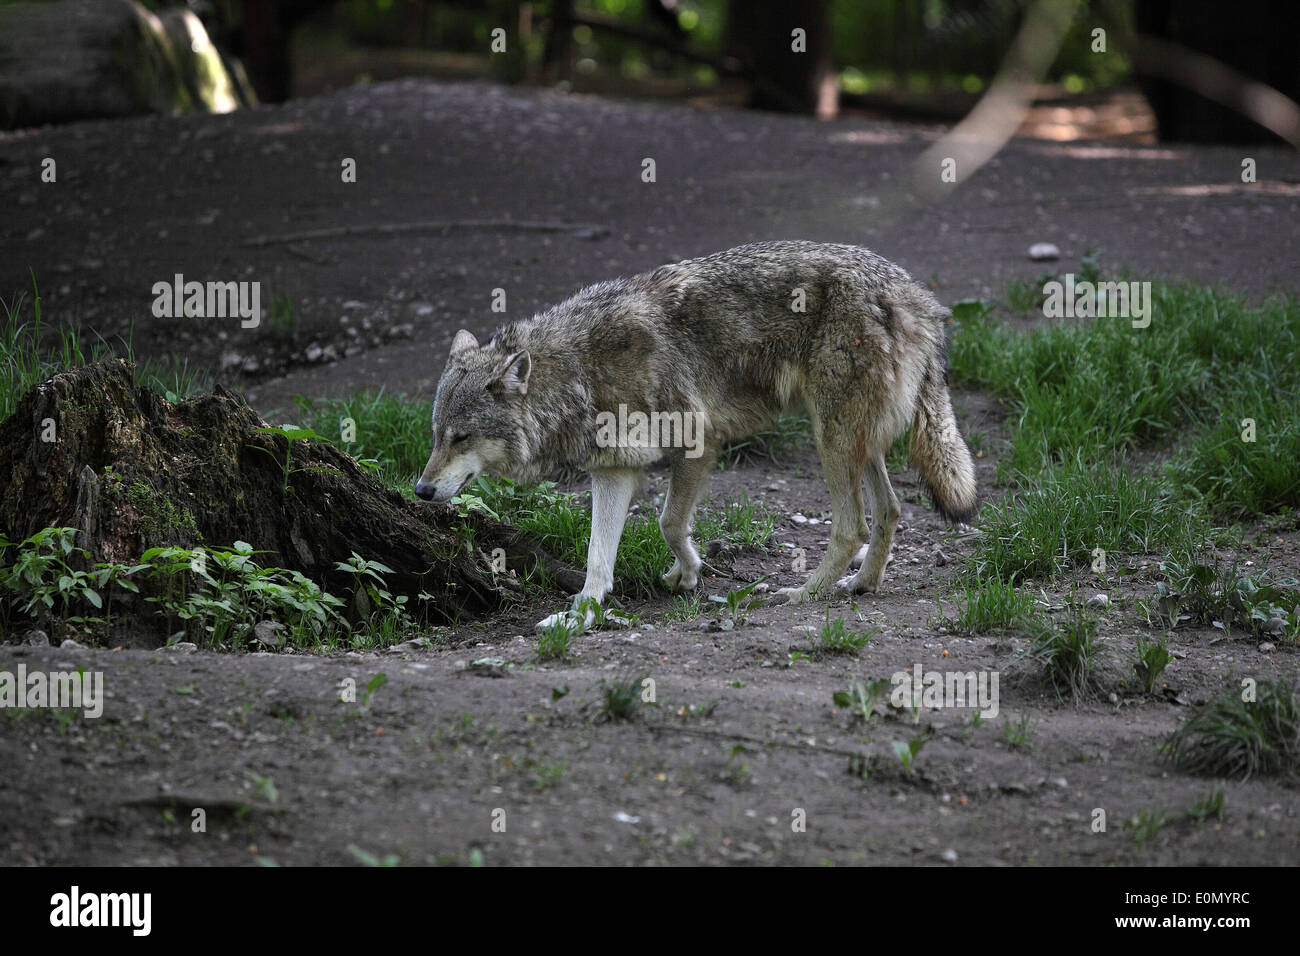 Grey wolf in a deer park Stock Photo